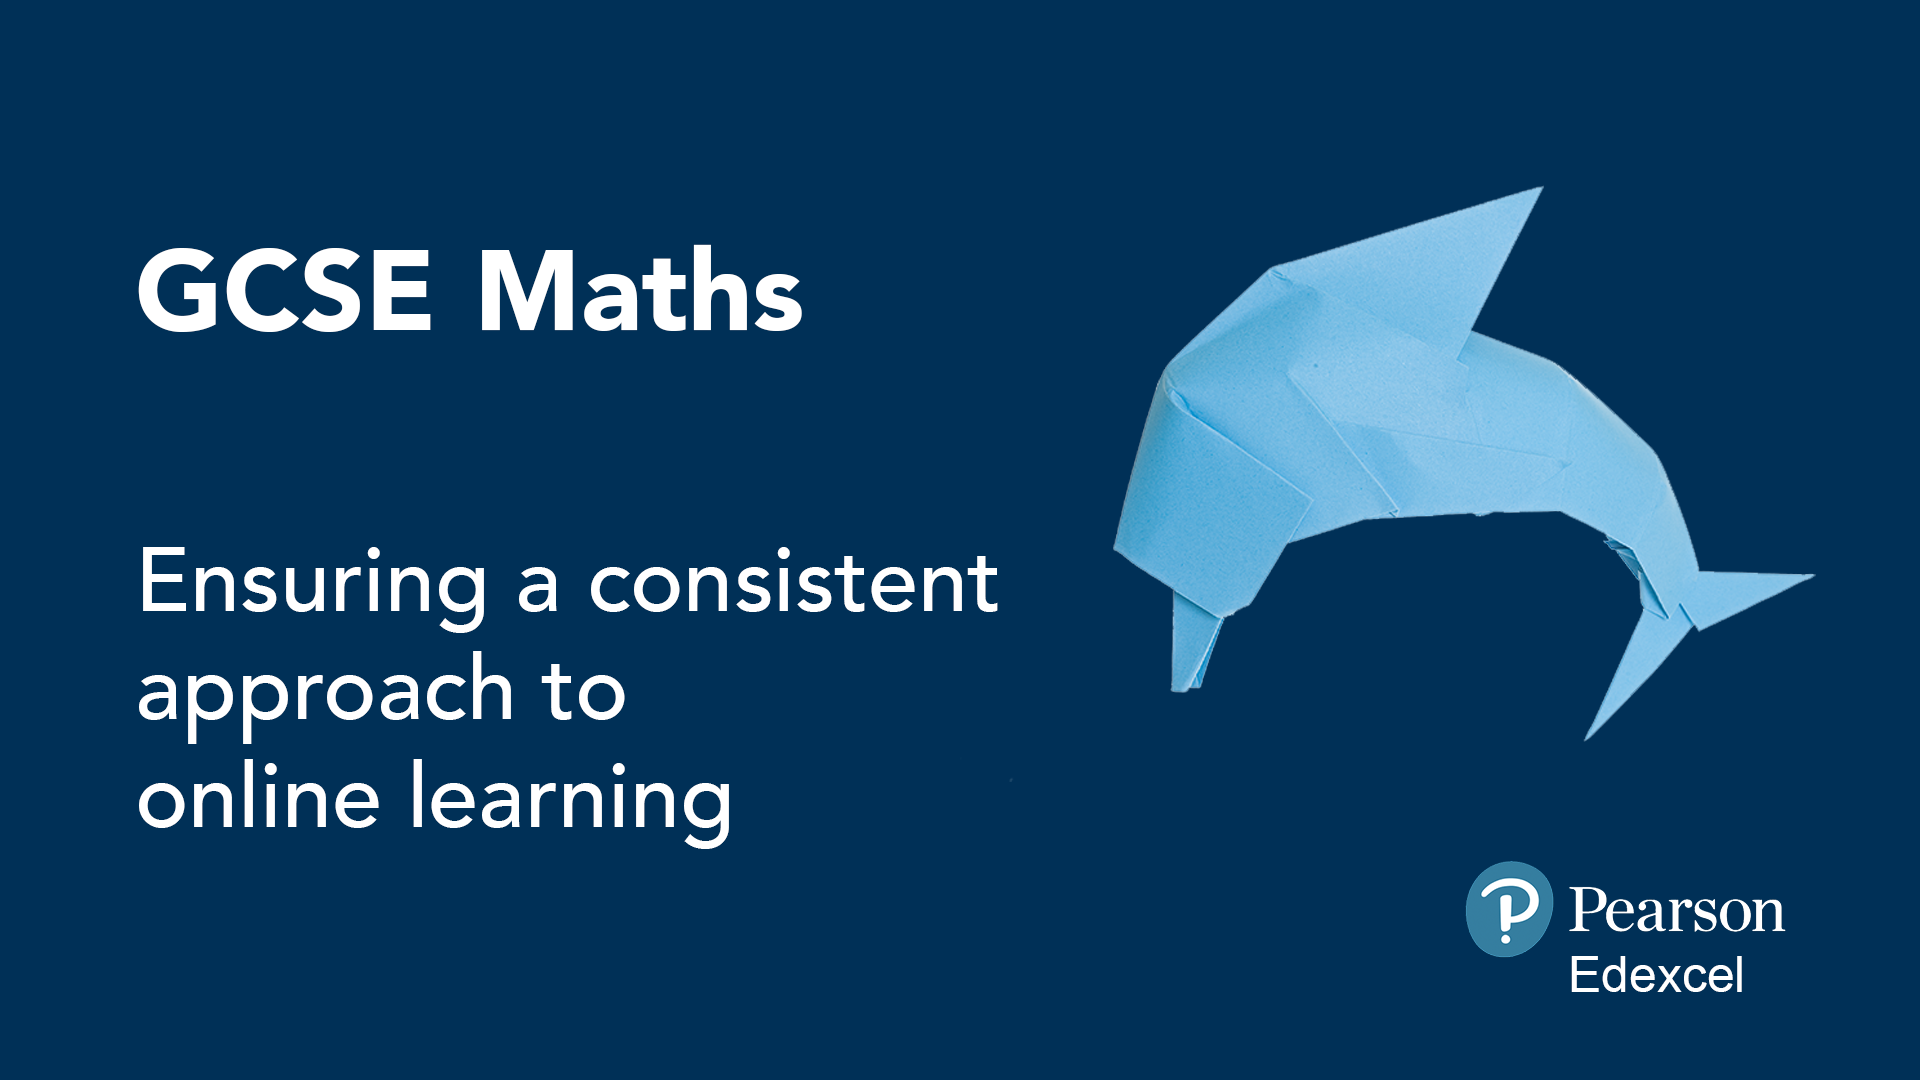 GCSE Maths: Ensuring a consistent approach to online learning